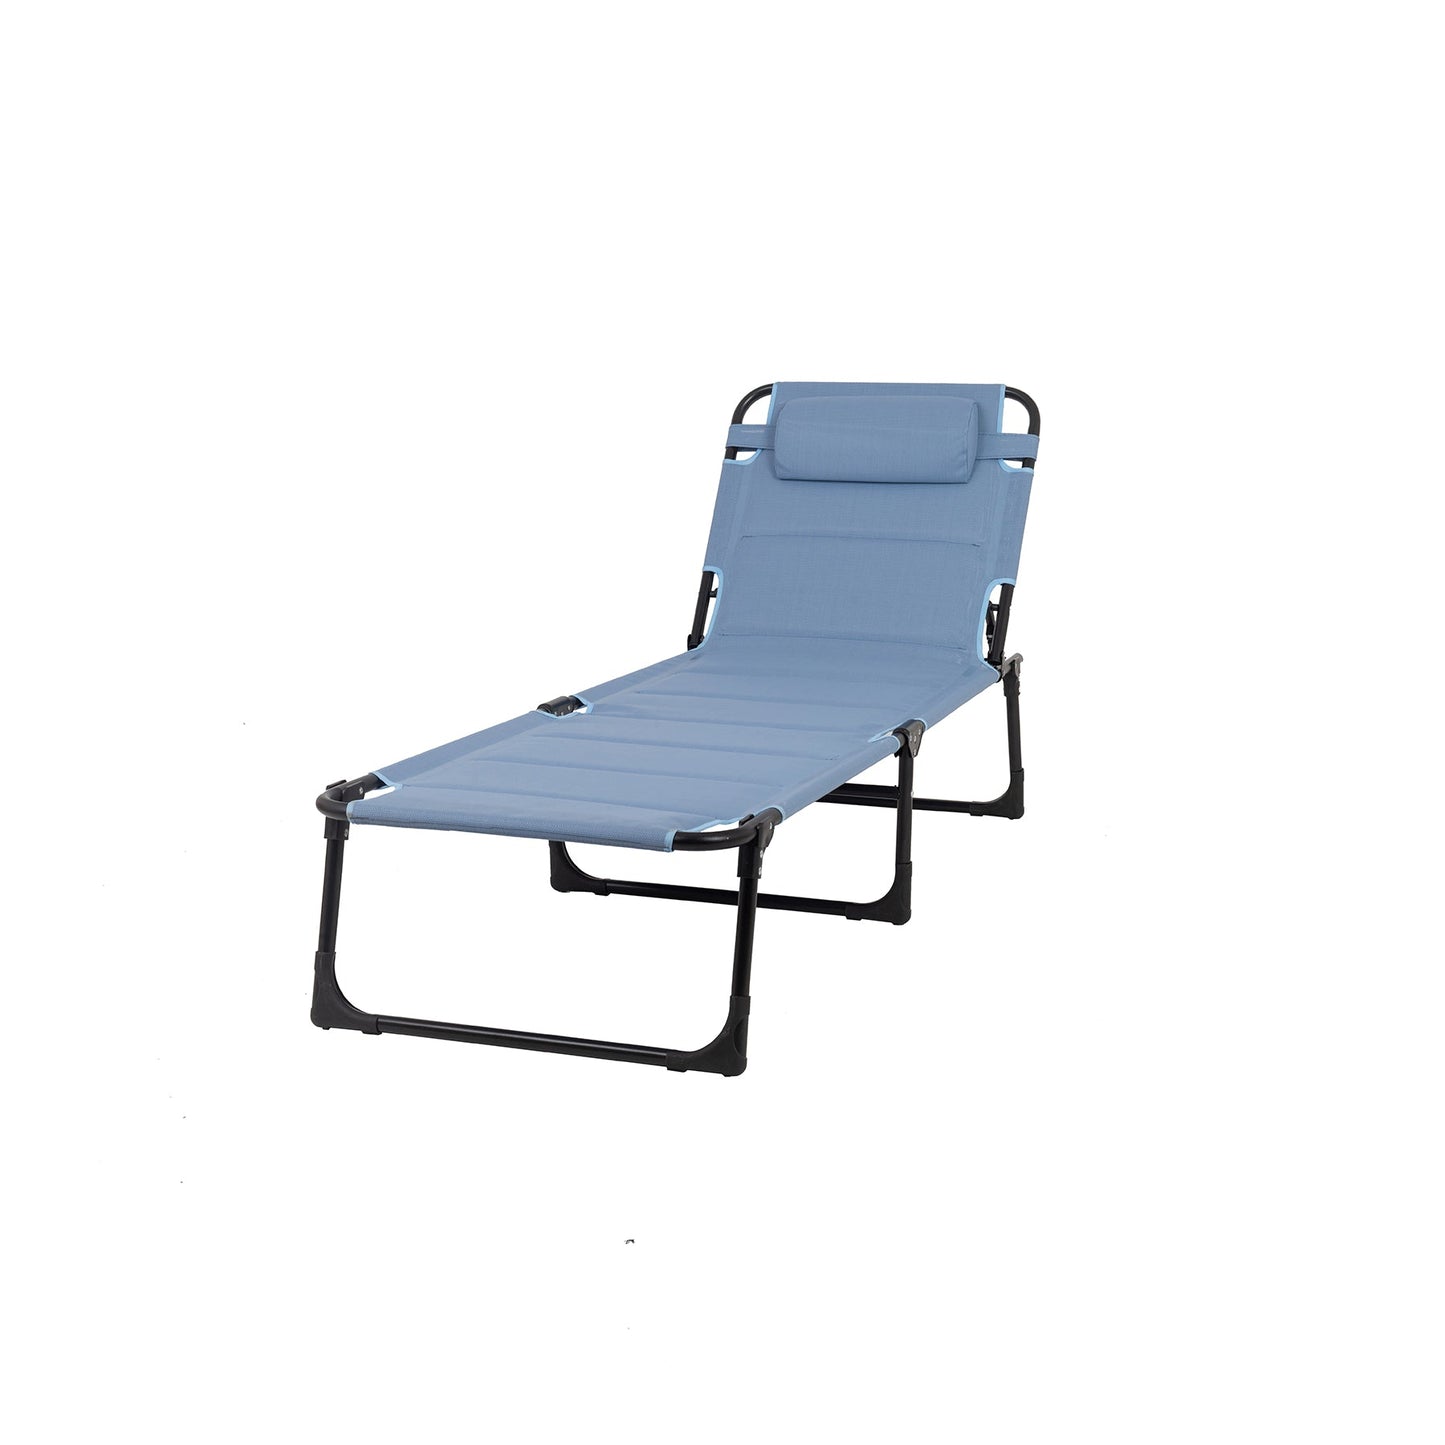 Straame Sunlounger Comfort Chair